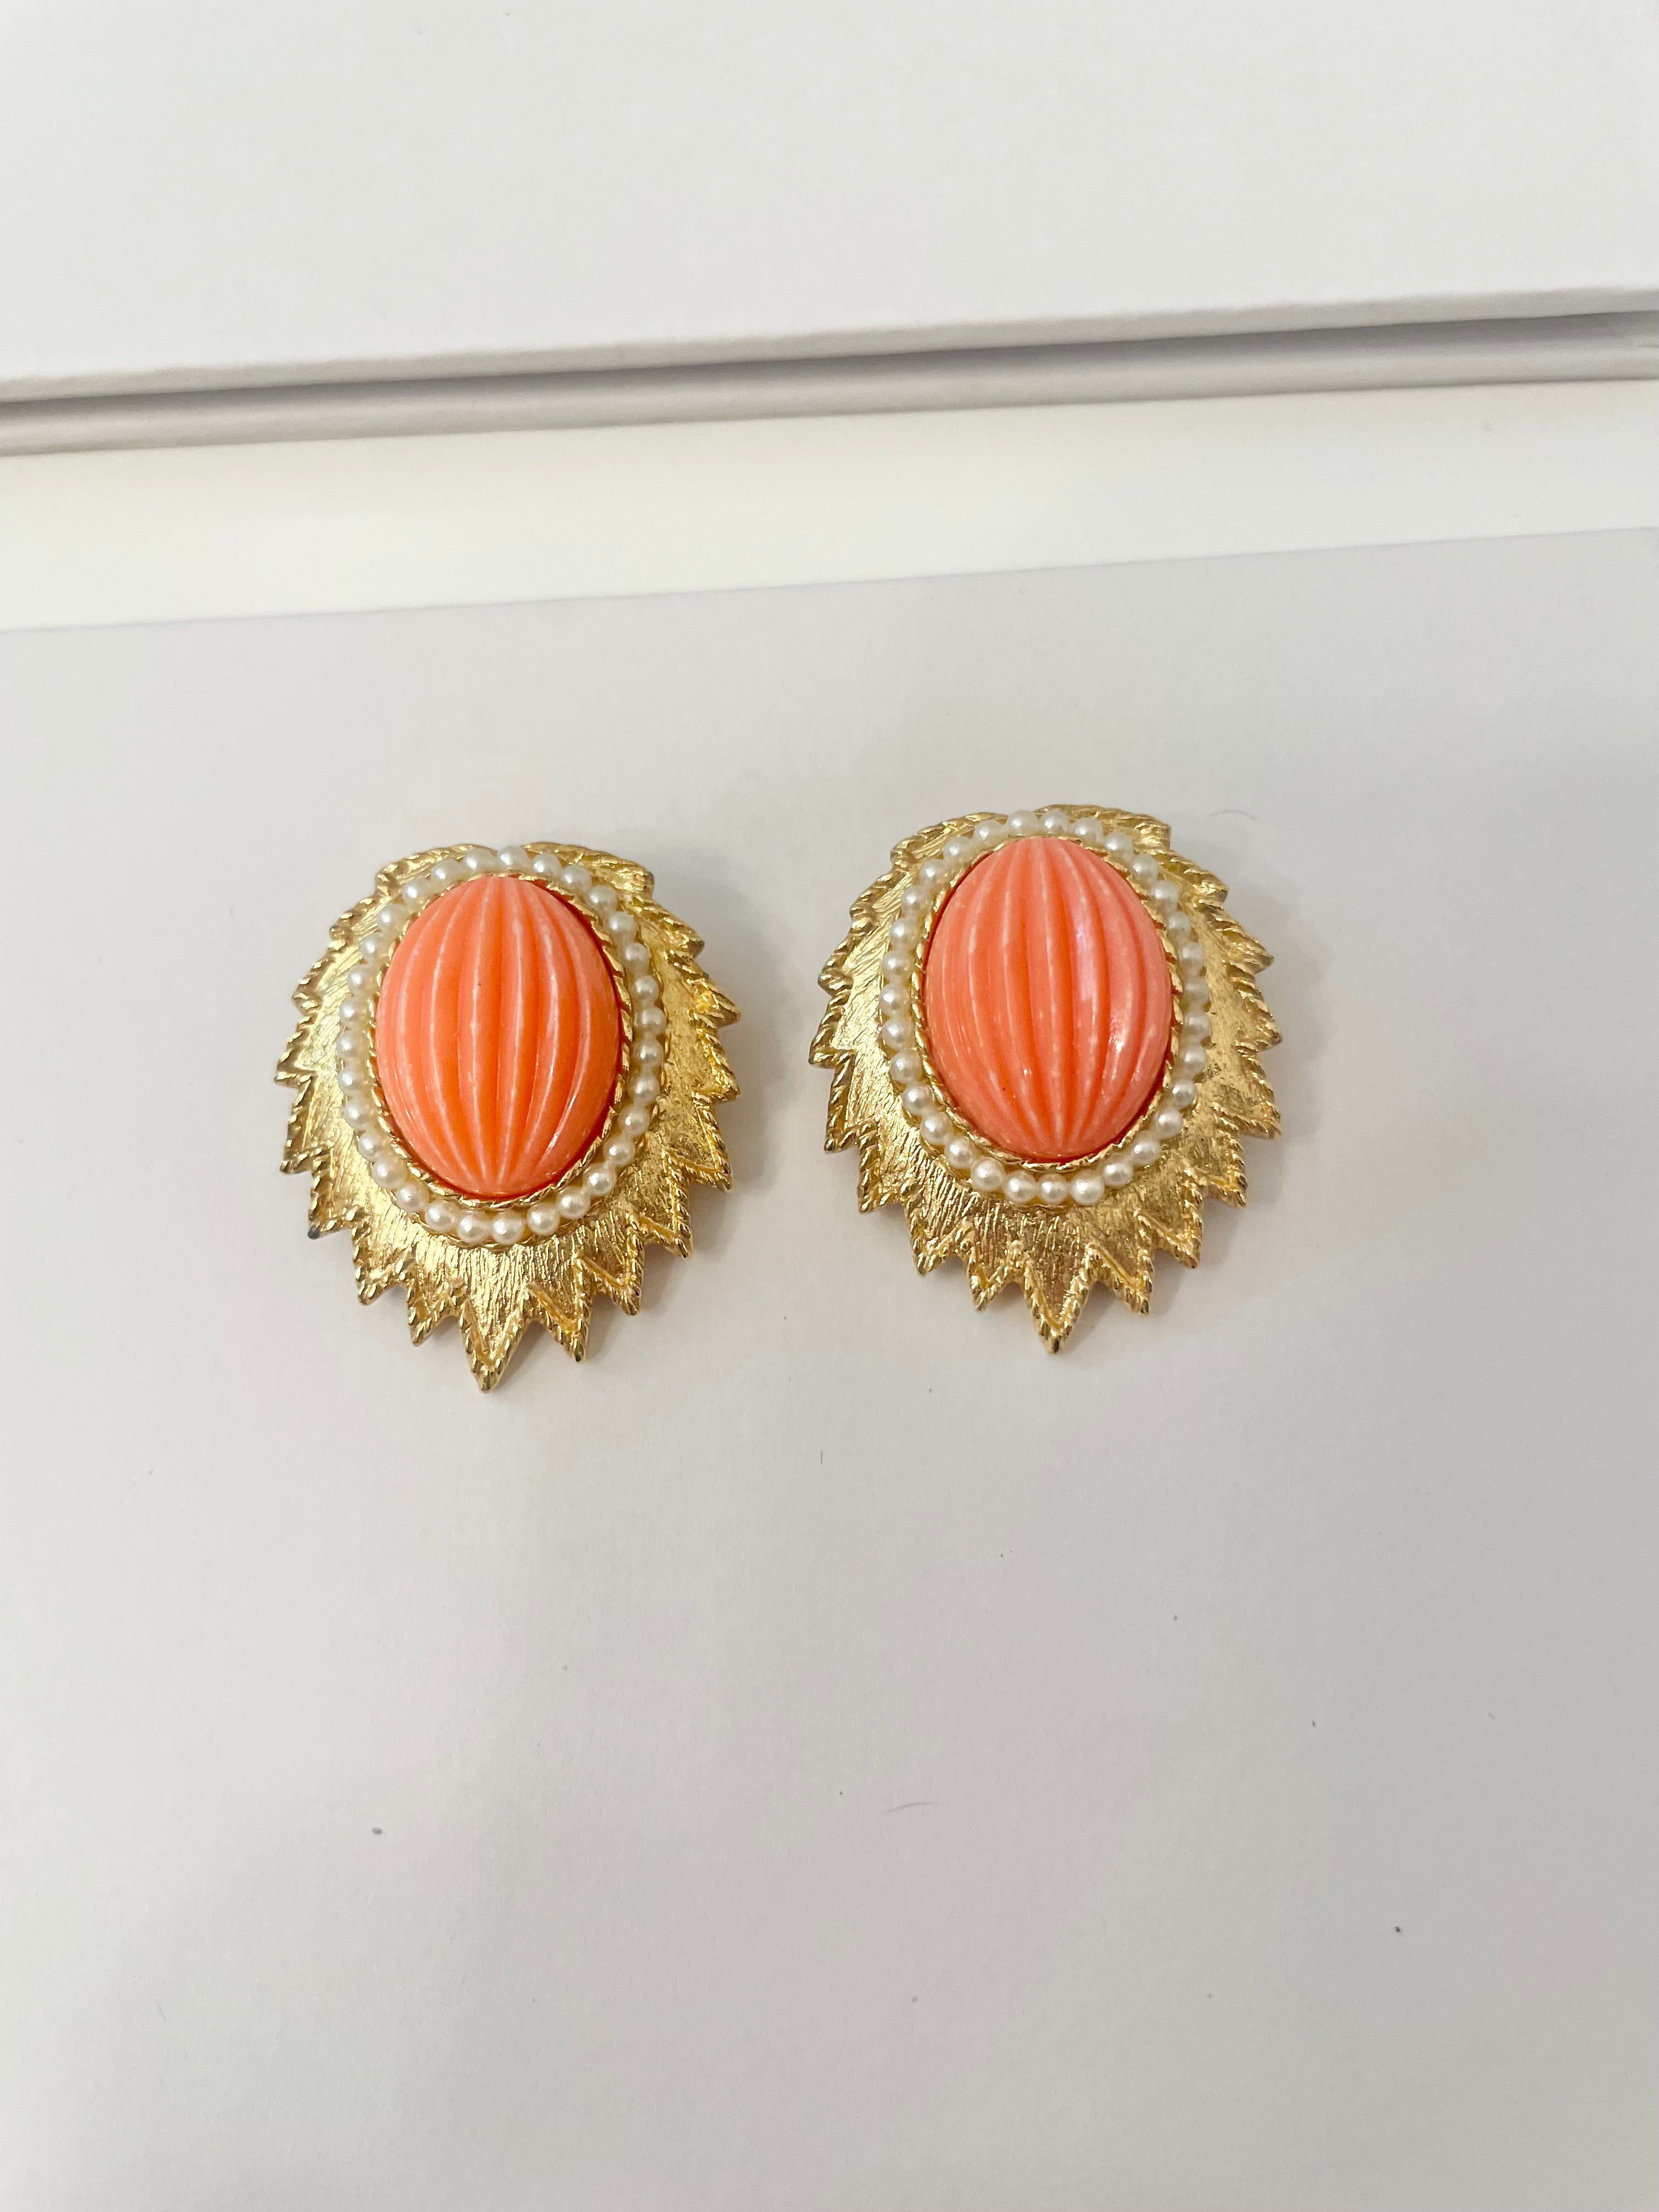 The Happy Hostess loves anything colorful.. She adores coral, and gold! These Emmons earrings are a true mid century delight!